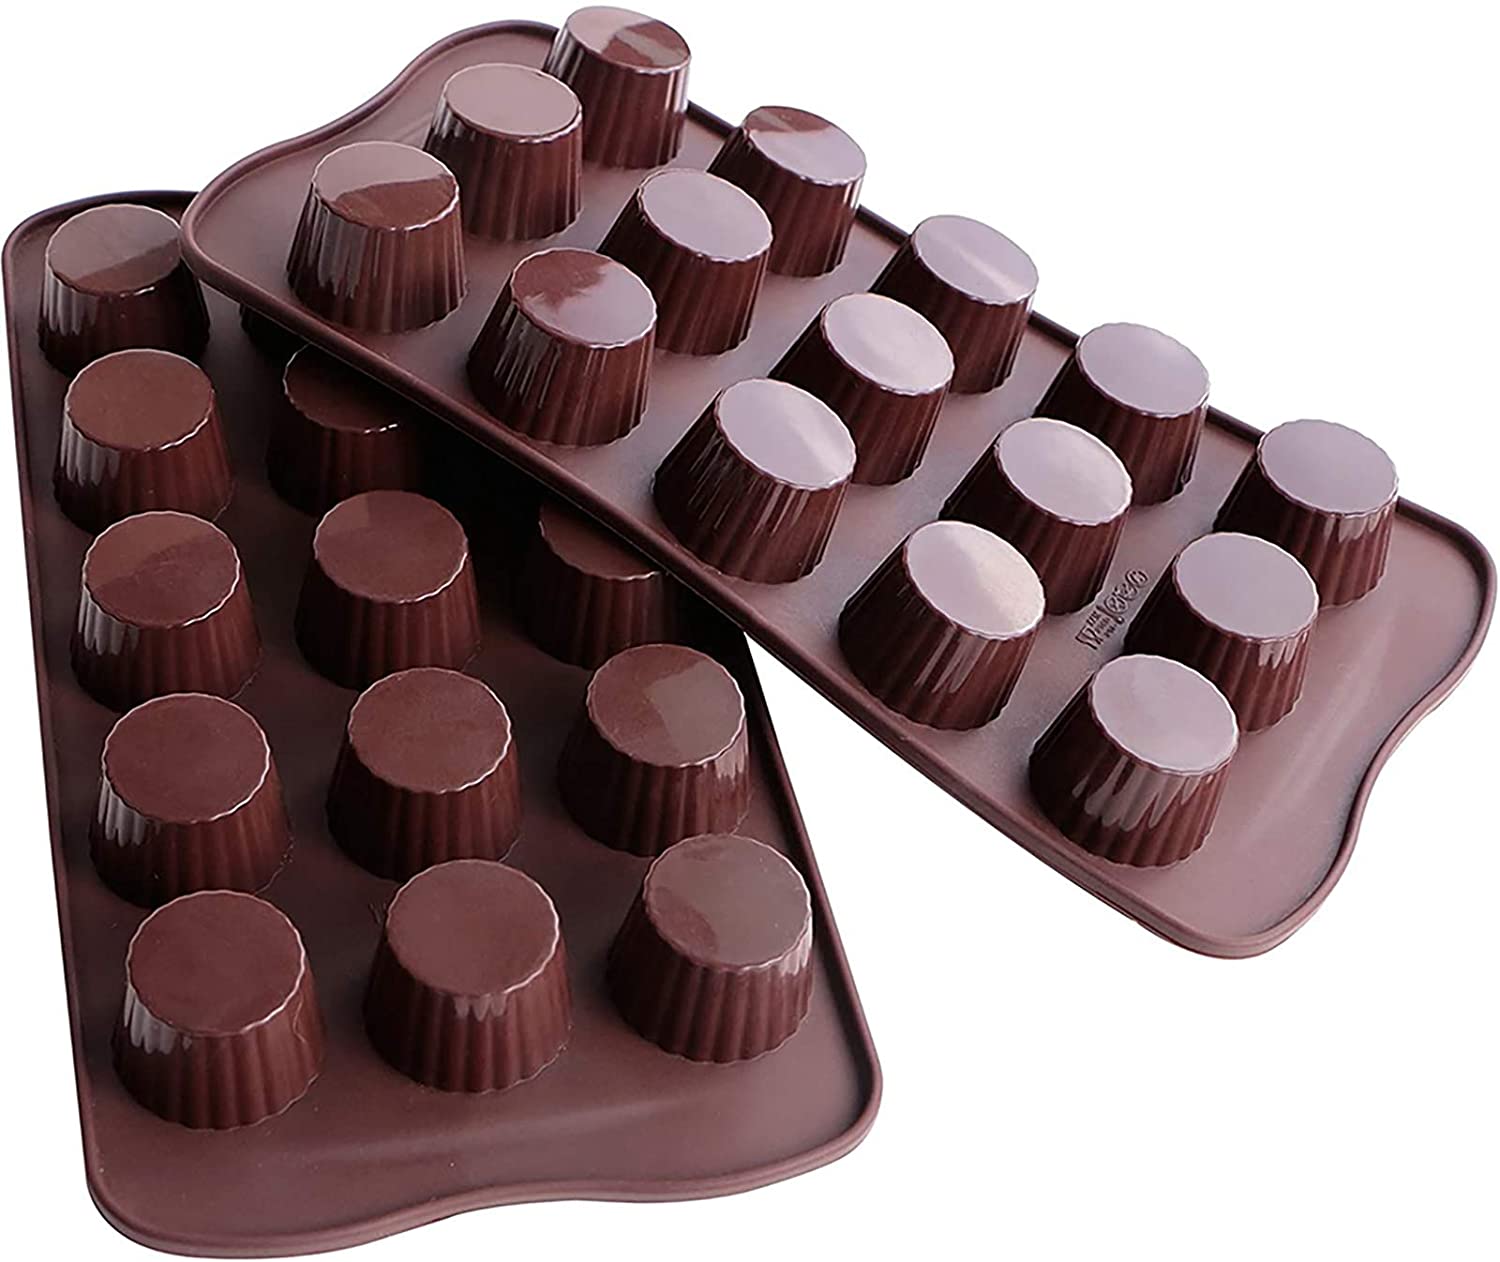 JOERSH Silicone Chocolate Molds for Fat Bombs Snacks & Truffles, 5PCS  93-Cavity Caramel Hard Candy Mold (Square, Round, Heart, Star, Flower  Shapes)